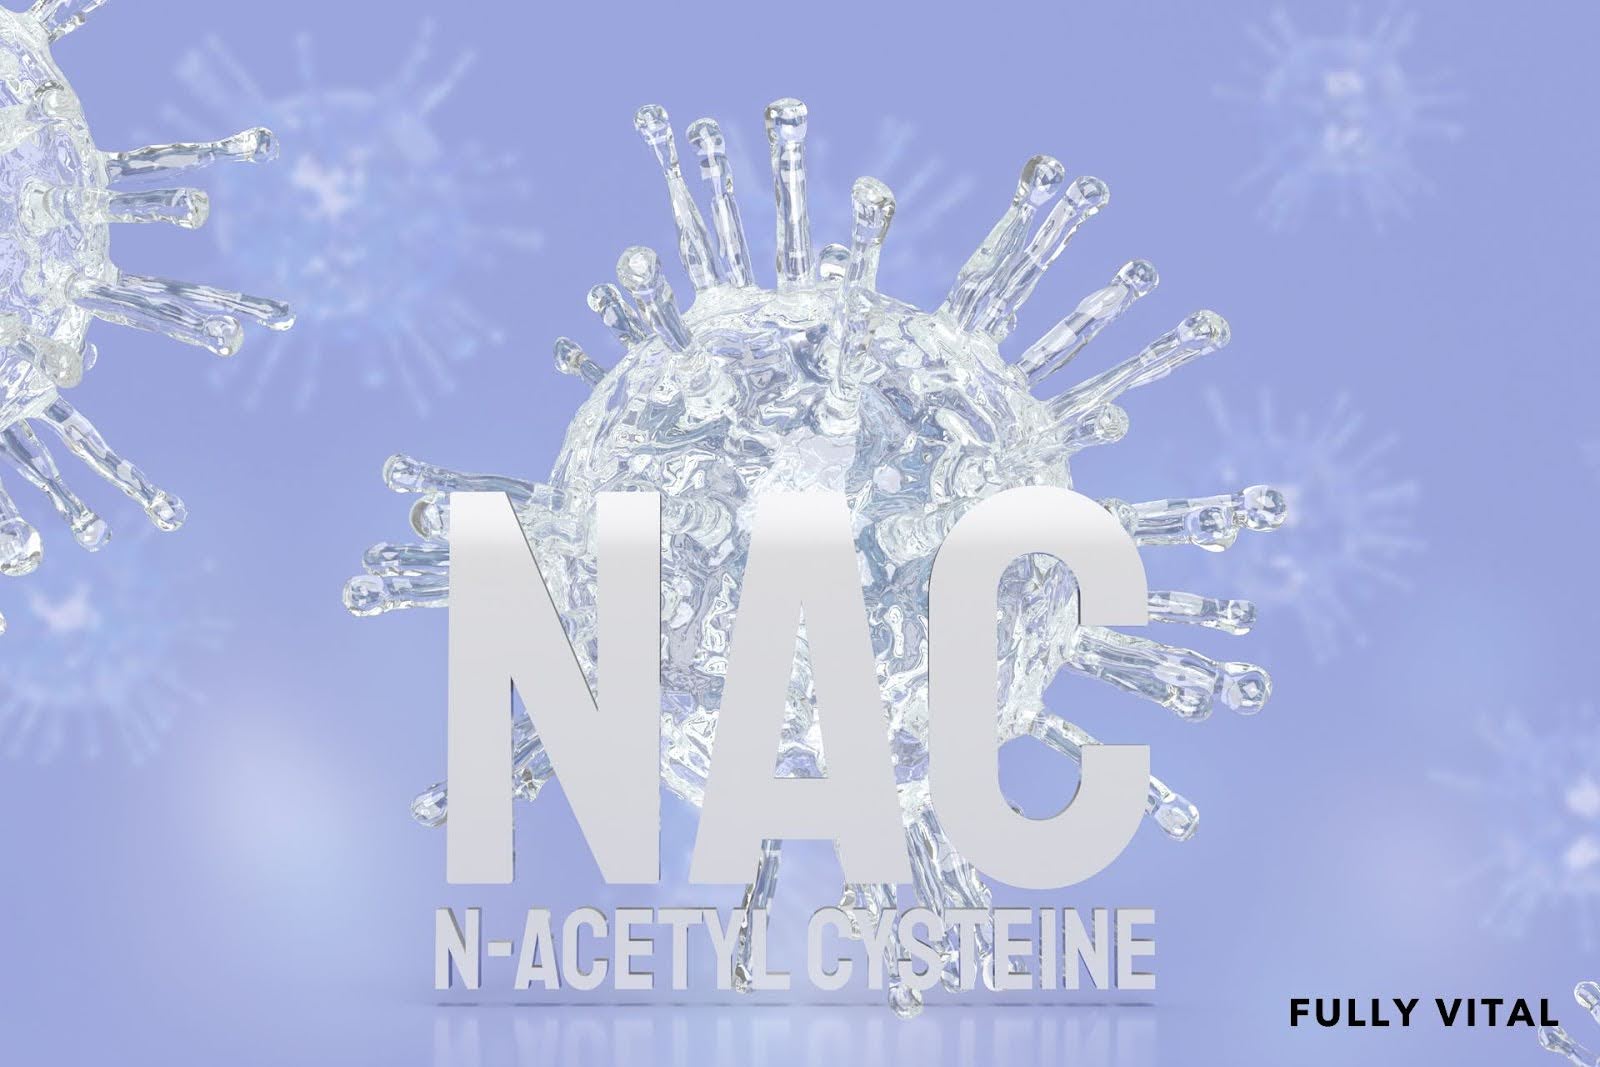 N-Acetyl Cysteine: A Game Changer For Hair Vitality